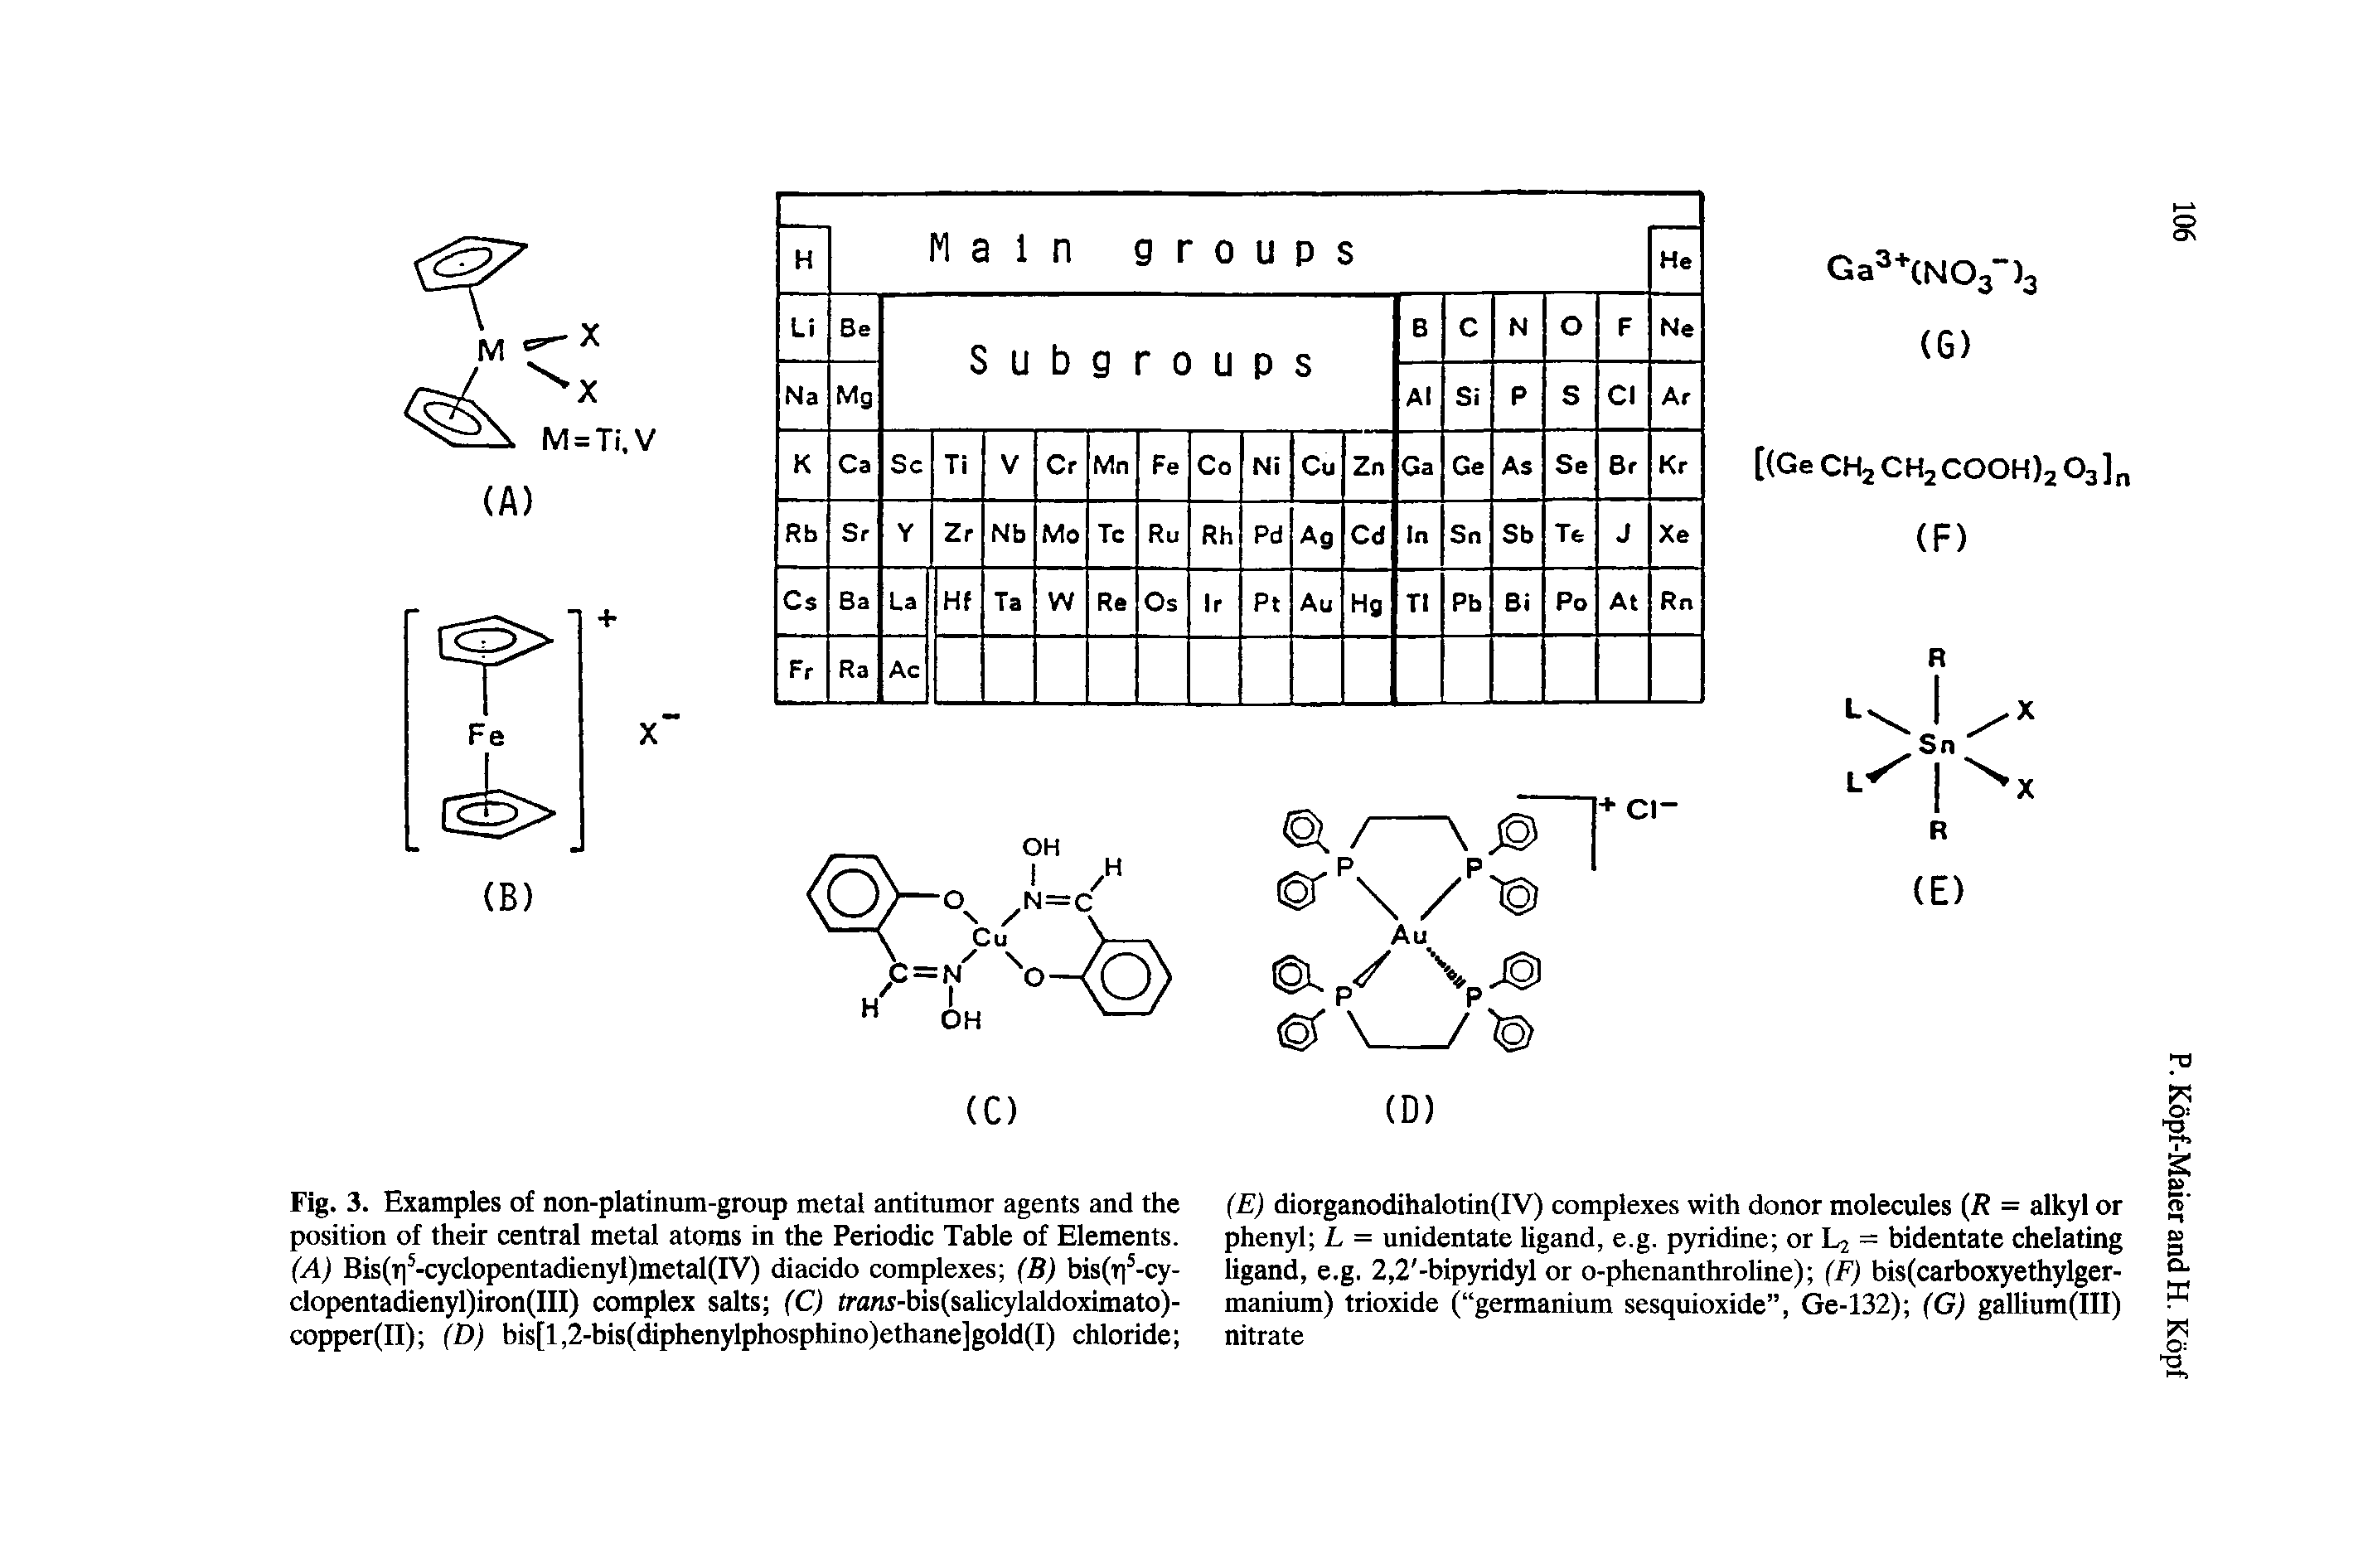 Fig. 3. Examples of non-platinum-group metal antitumor agents and the (E) diorganodihalotin(IV) complexes with donor molecules R = alkyl or position of their central metal atoms in the Periodic Table of Elements. phenyl L = unidentate ligand, e.g. pyridine or L2 = bidentate chelating...